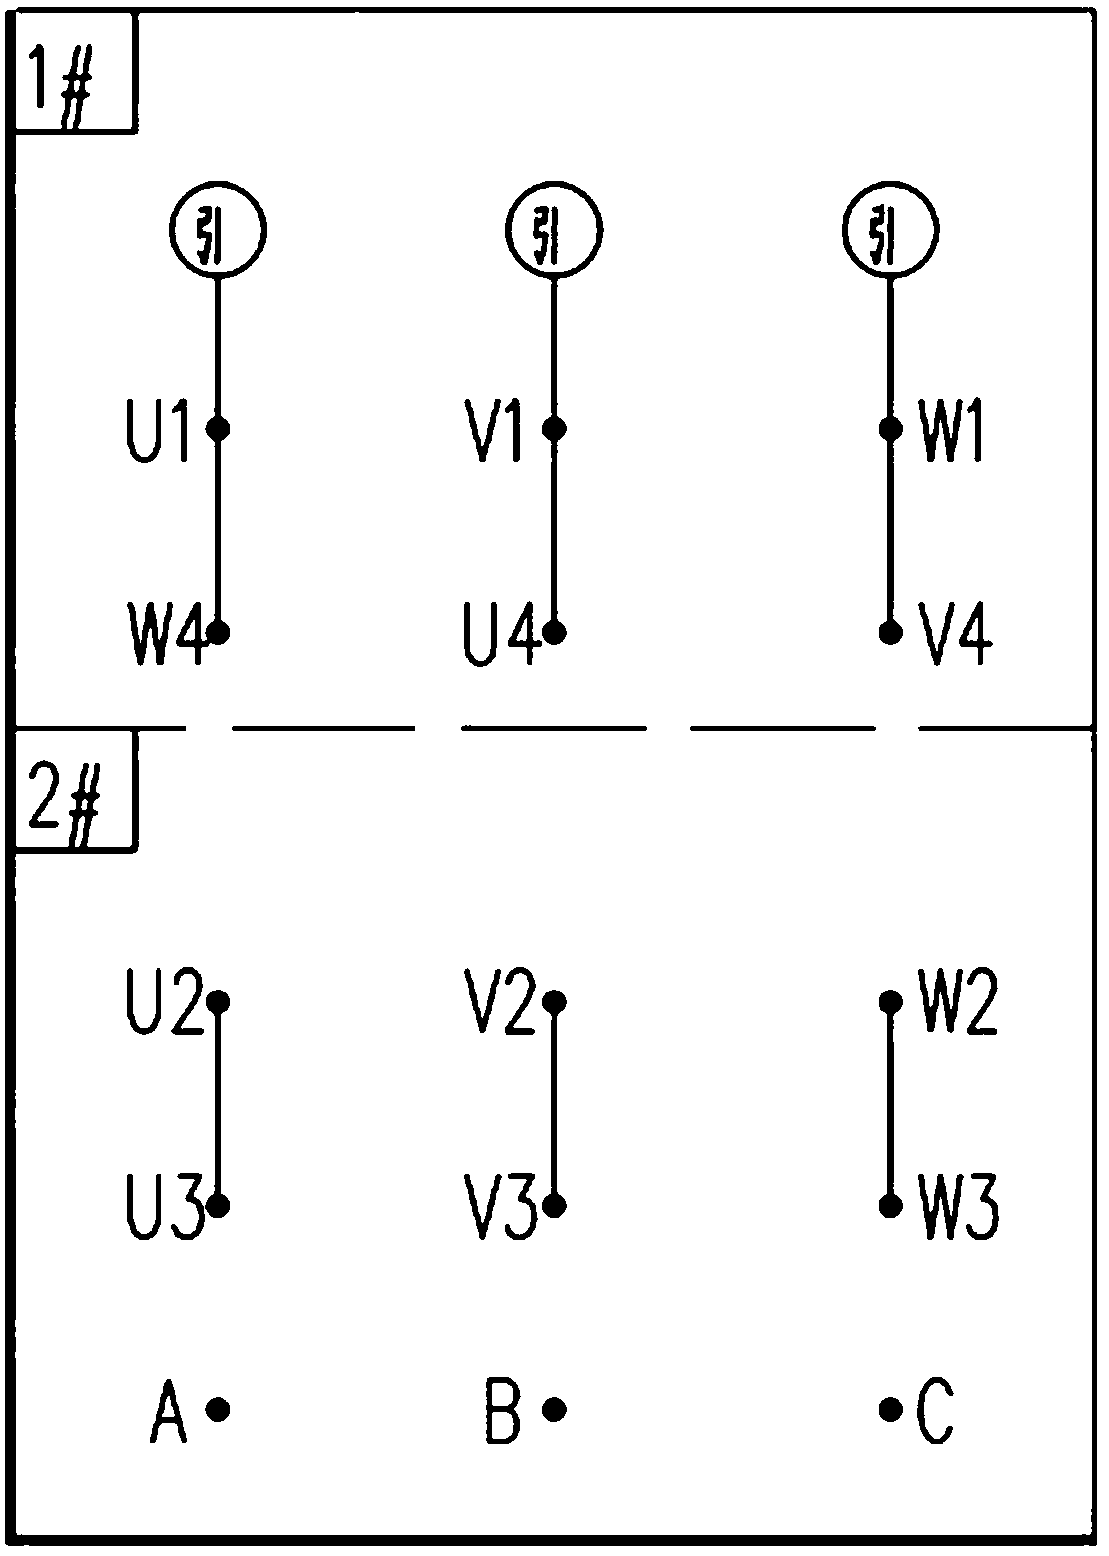 A method for realizing single and double star-delta connection switching of a motor by using a double-outlet box